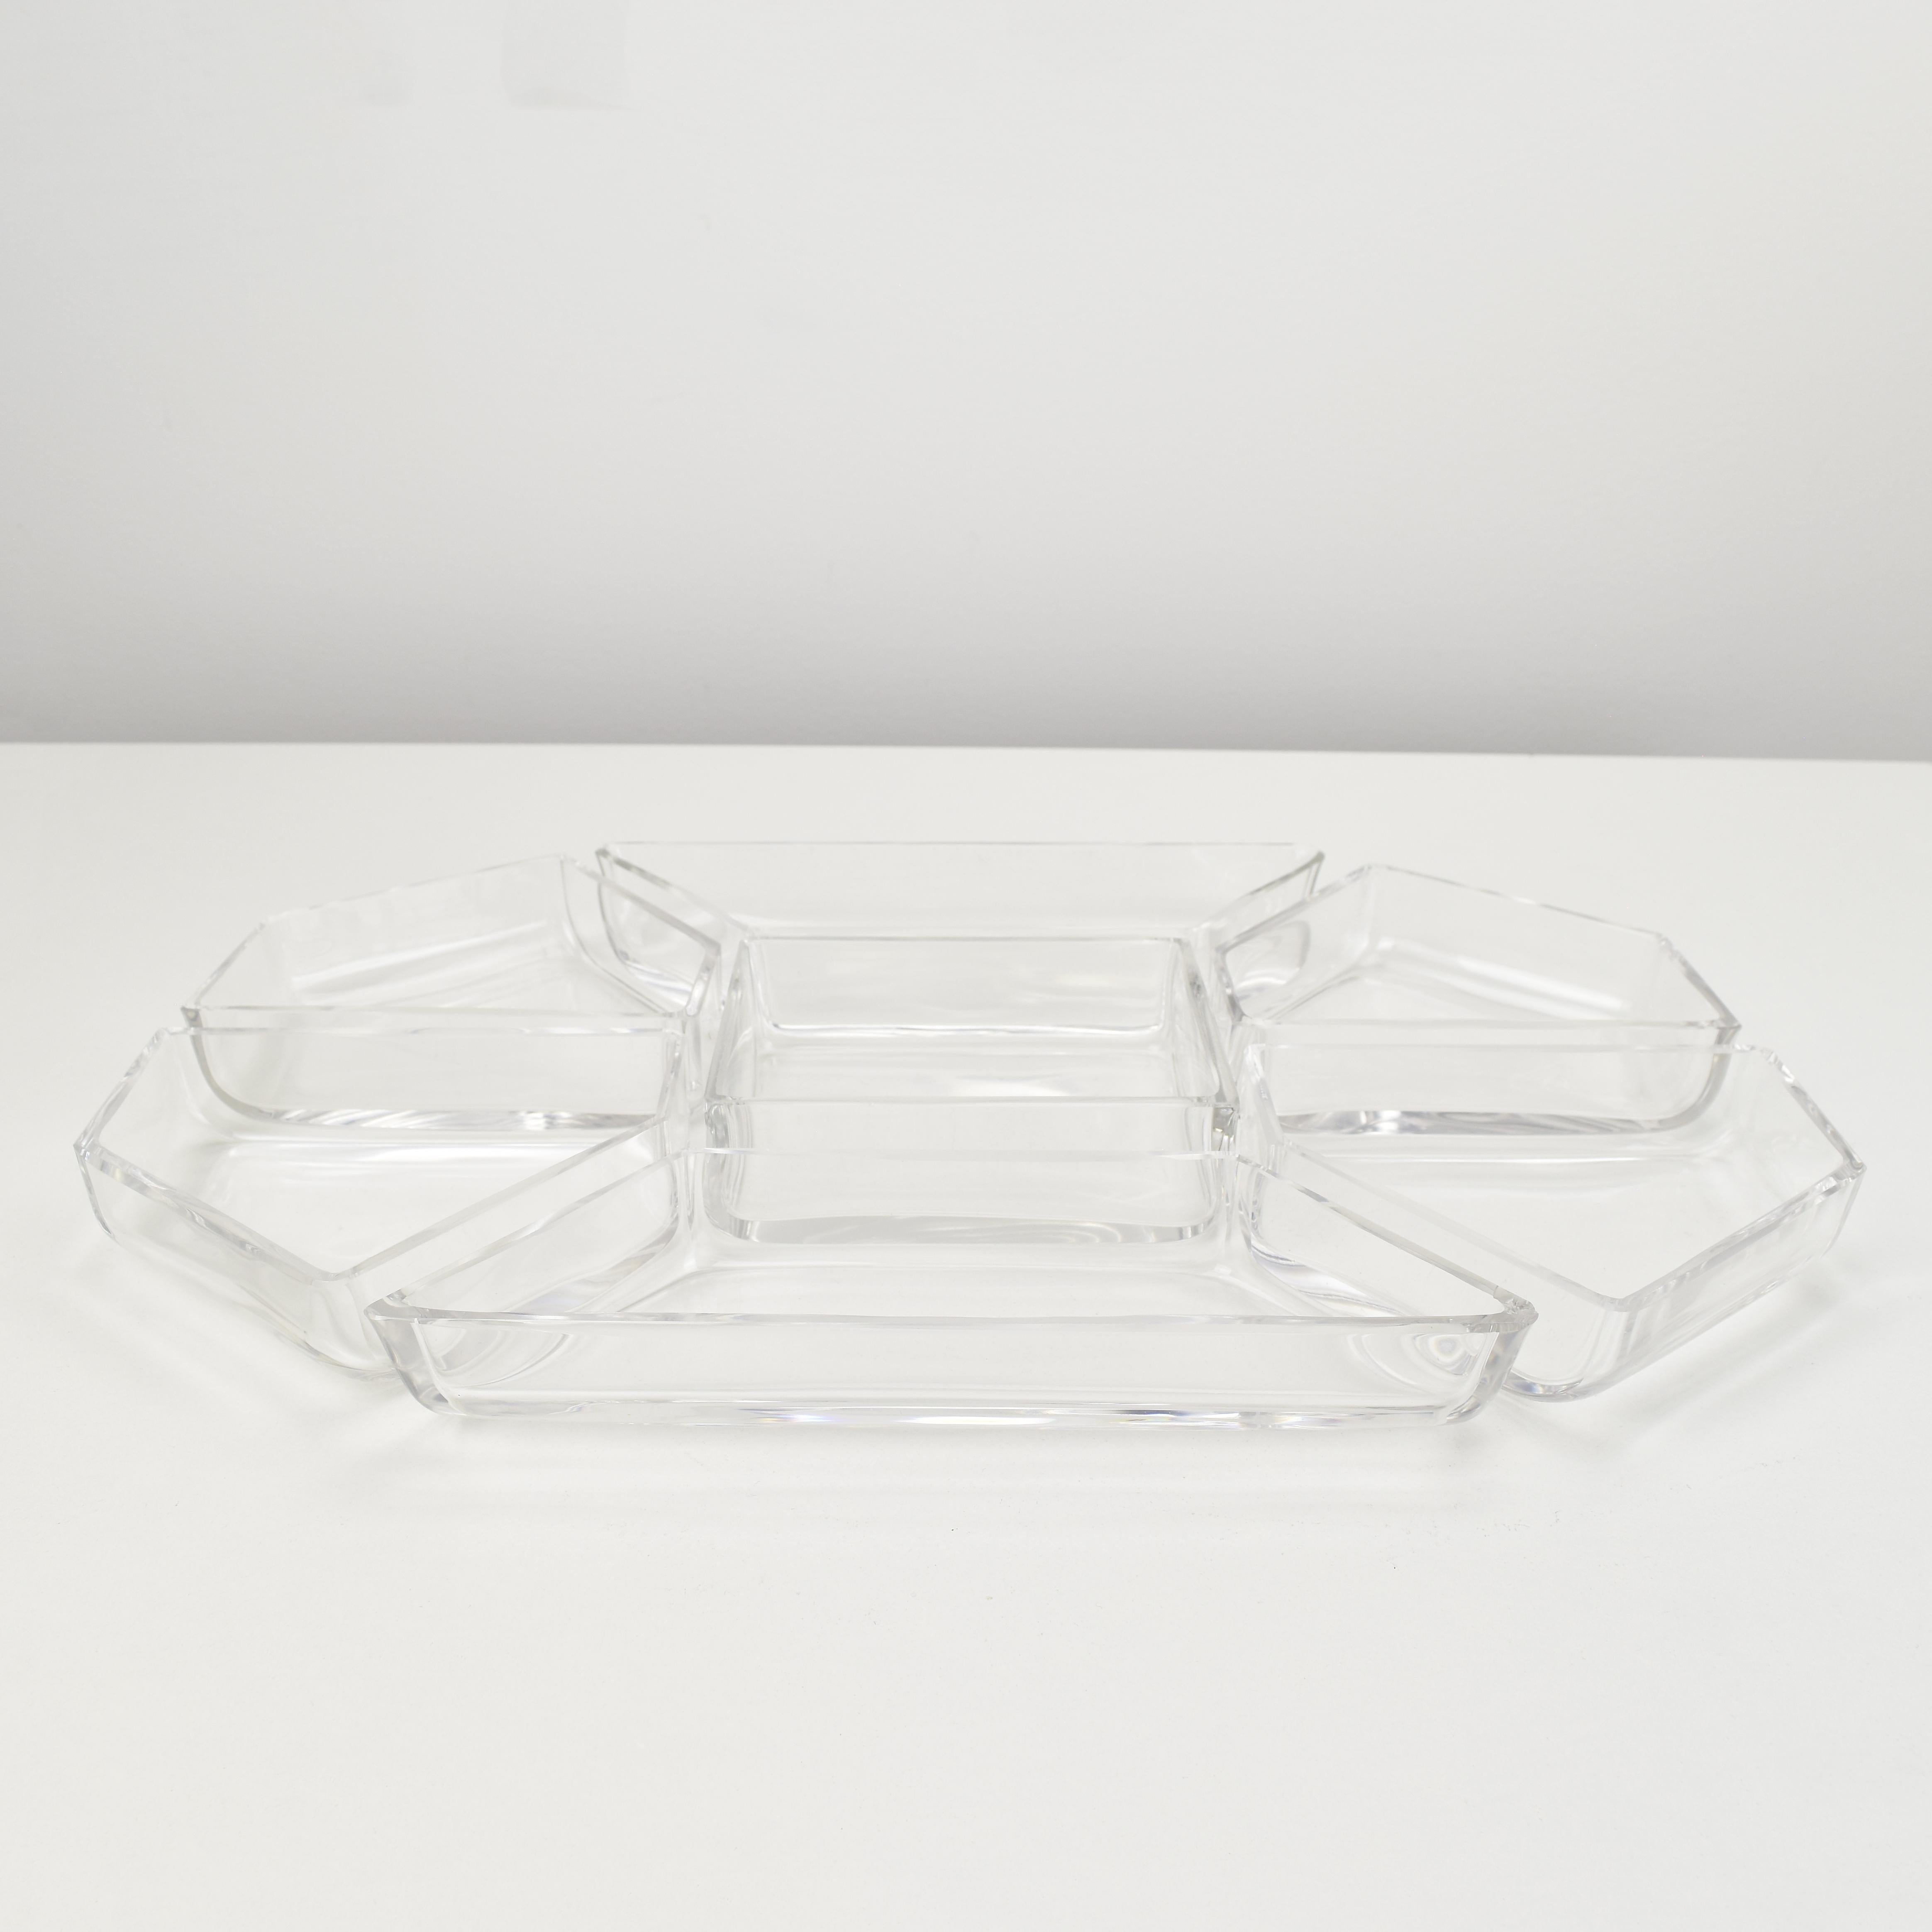 Large Art Deco Cabaret Bar Snack Tray by Quist Silverplate & Cut Crystal Liners For Sale 1